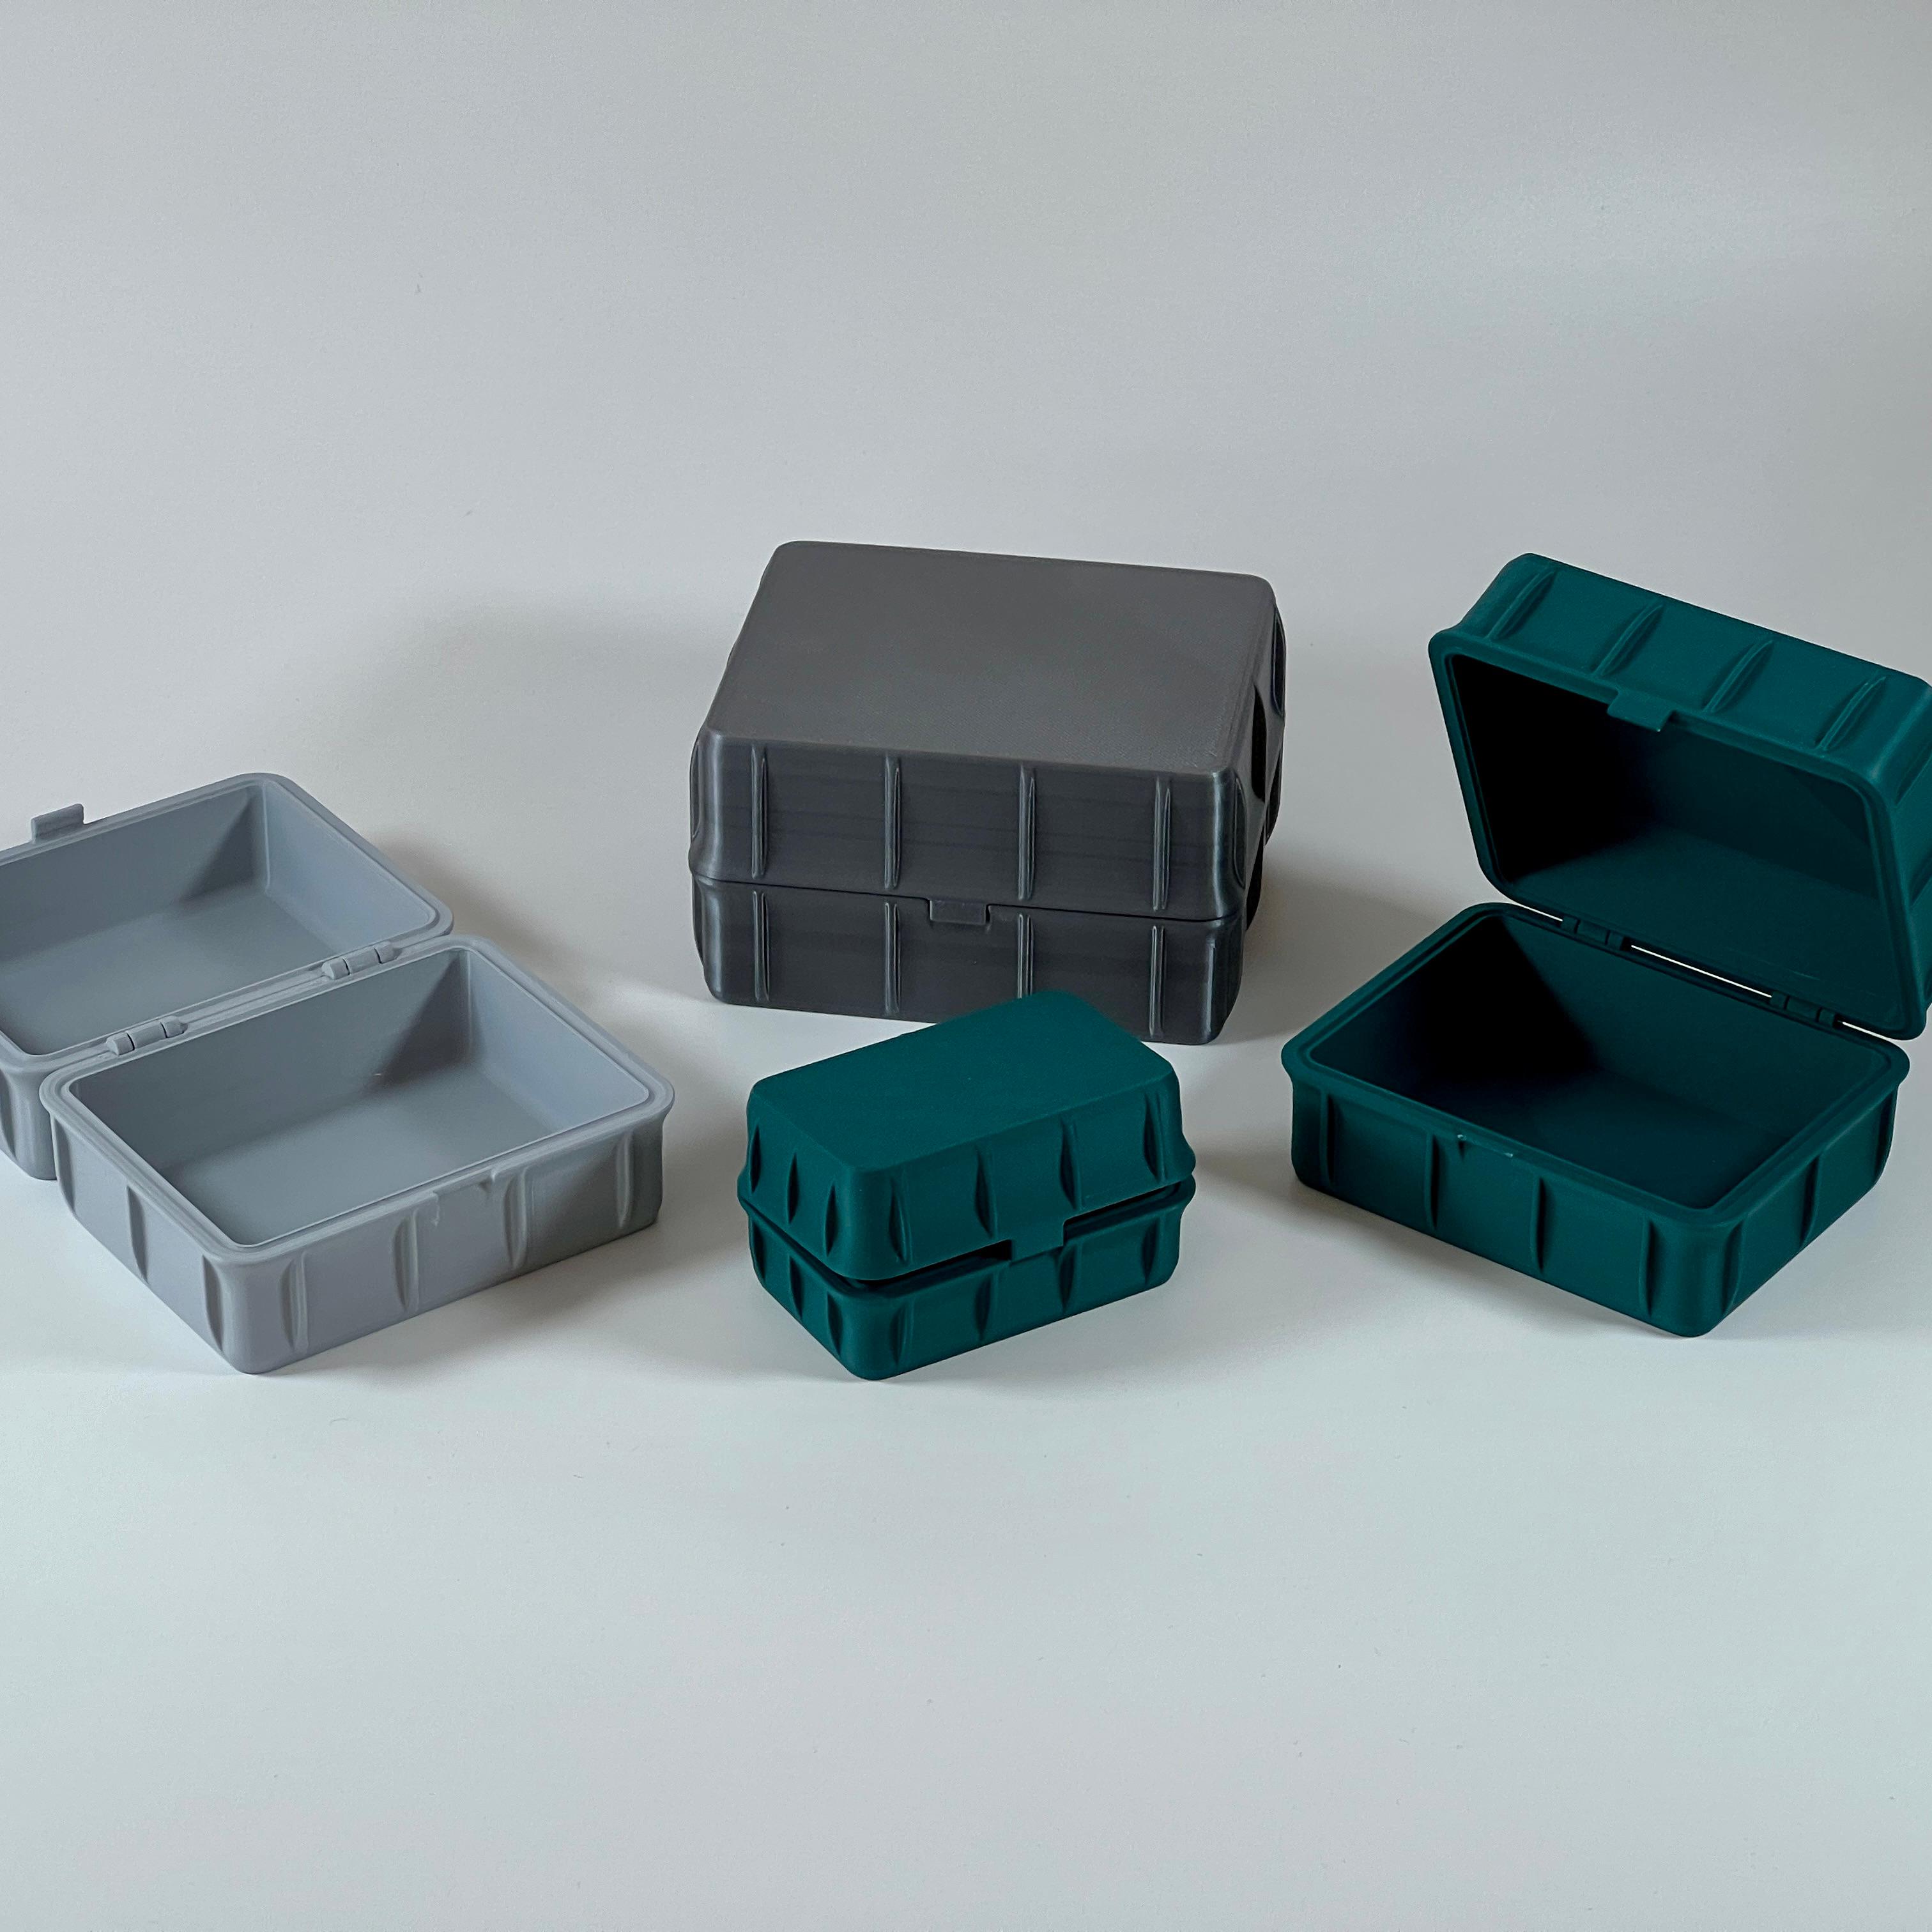 Set of 4 Storage Boxes Print in Place with Snap Lock 3d model